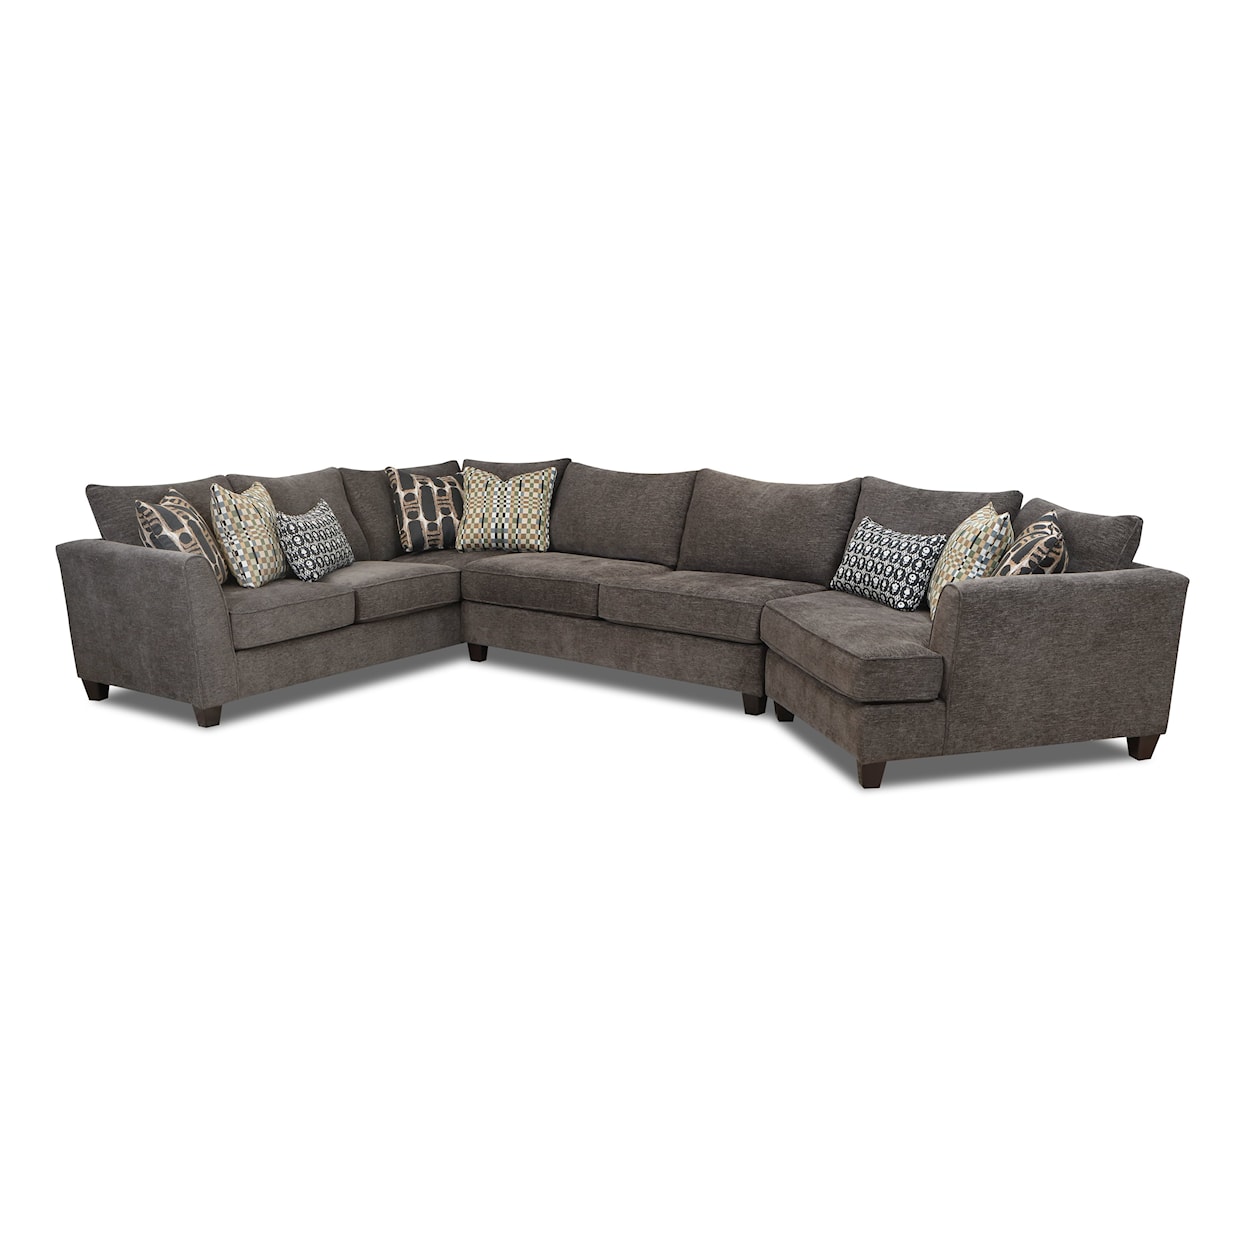 Fusion Furniture 28 MERIDA CLOVE Sectional with Cuddler